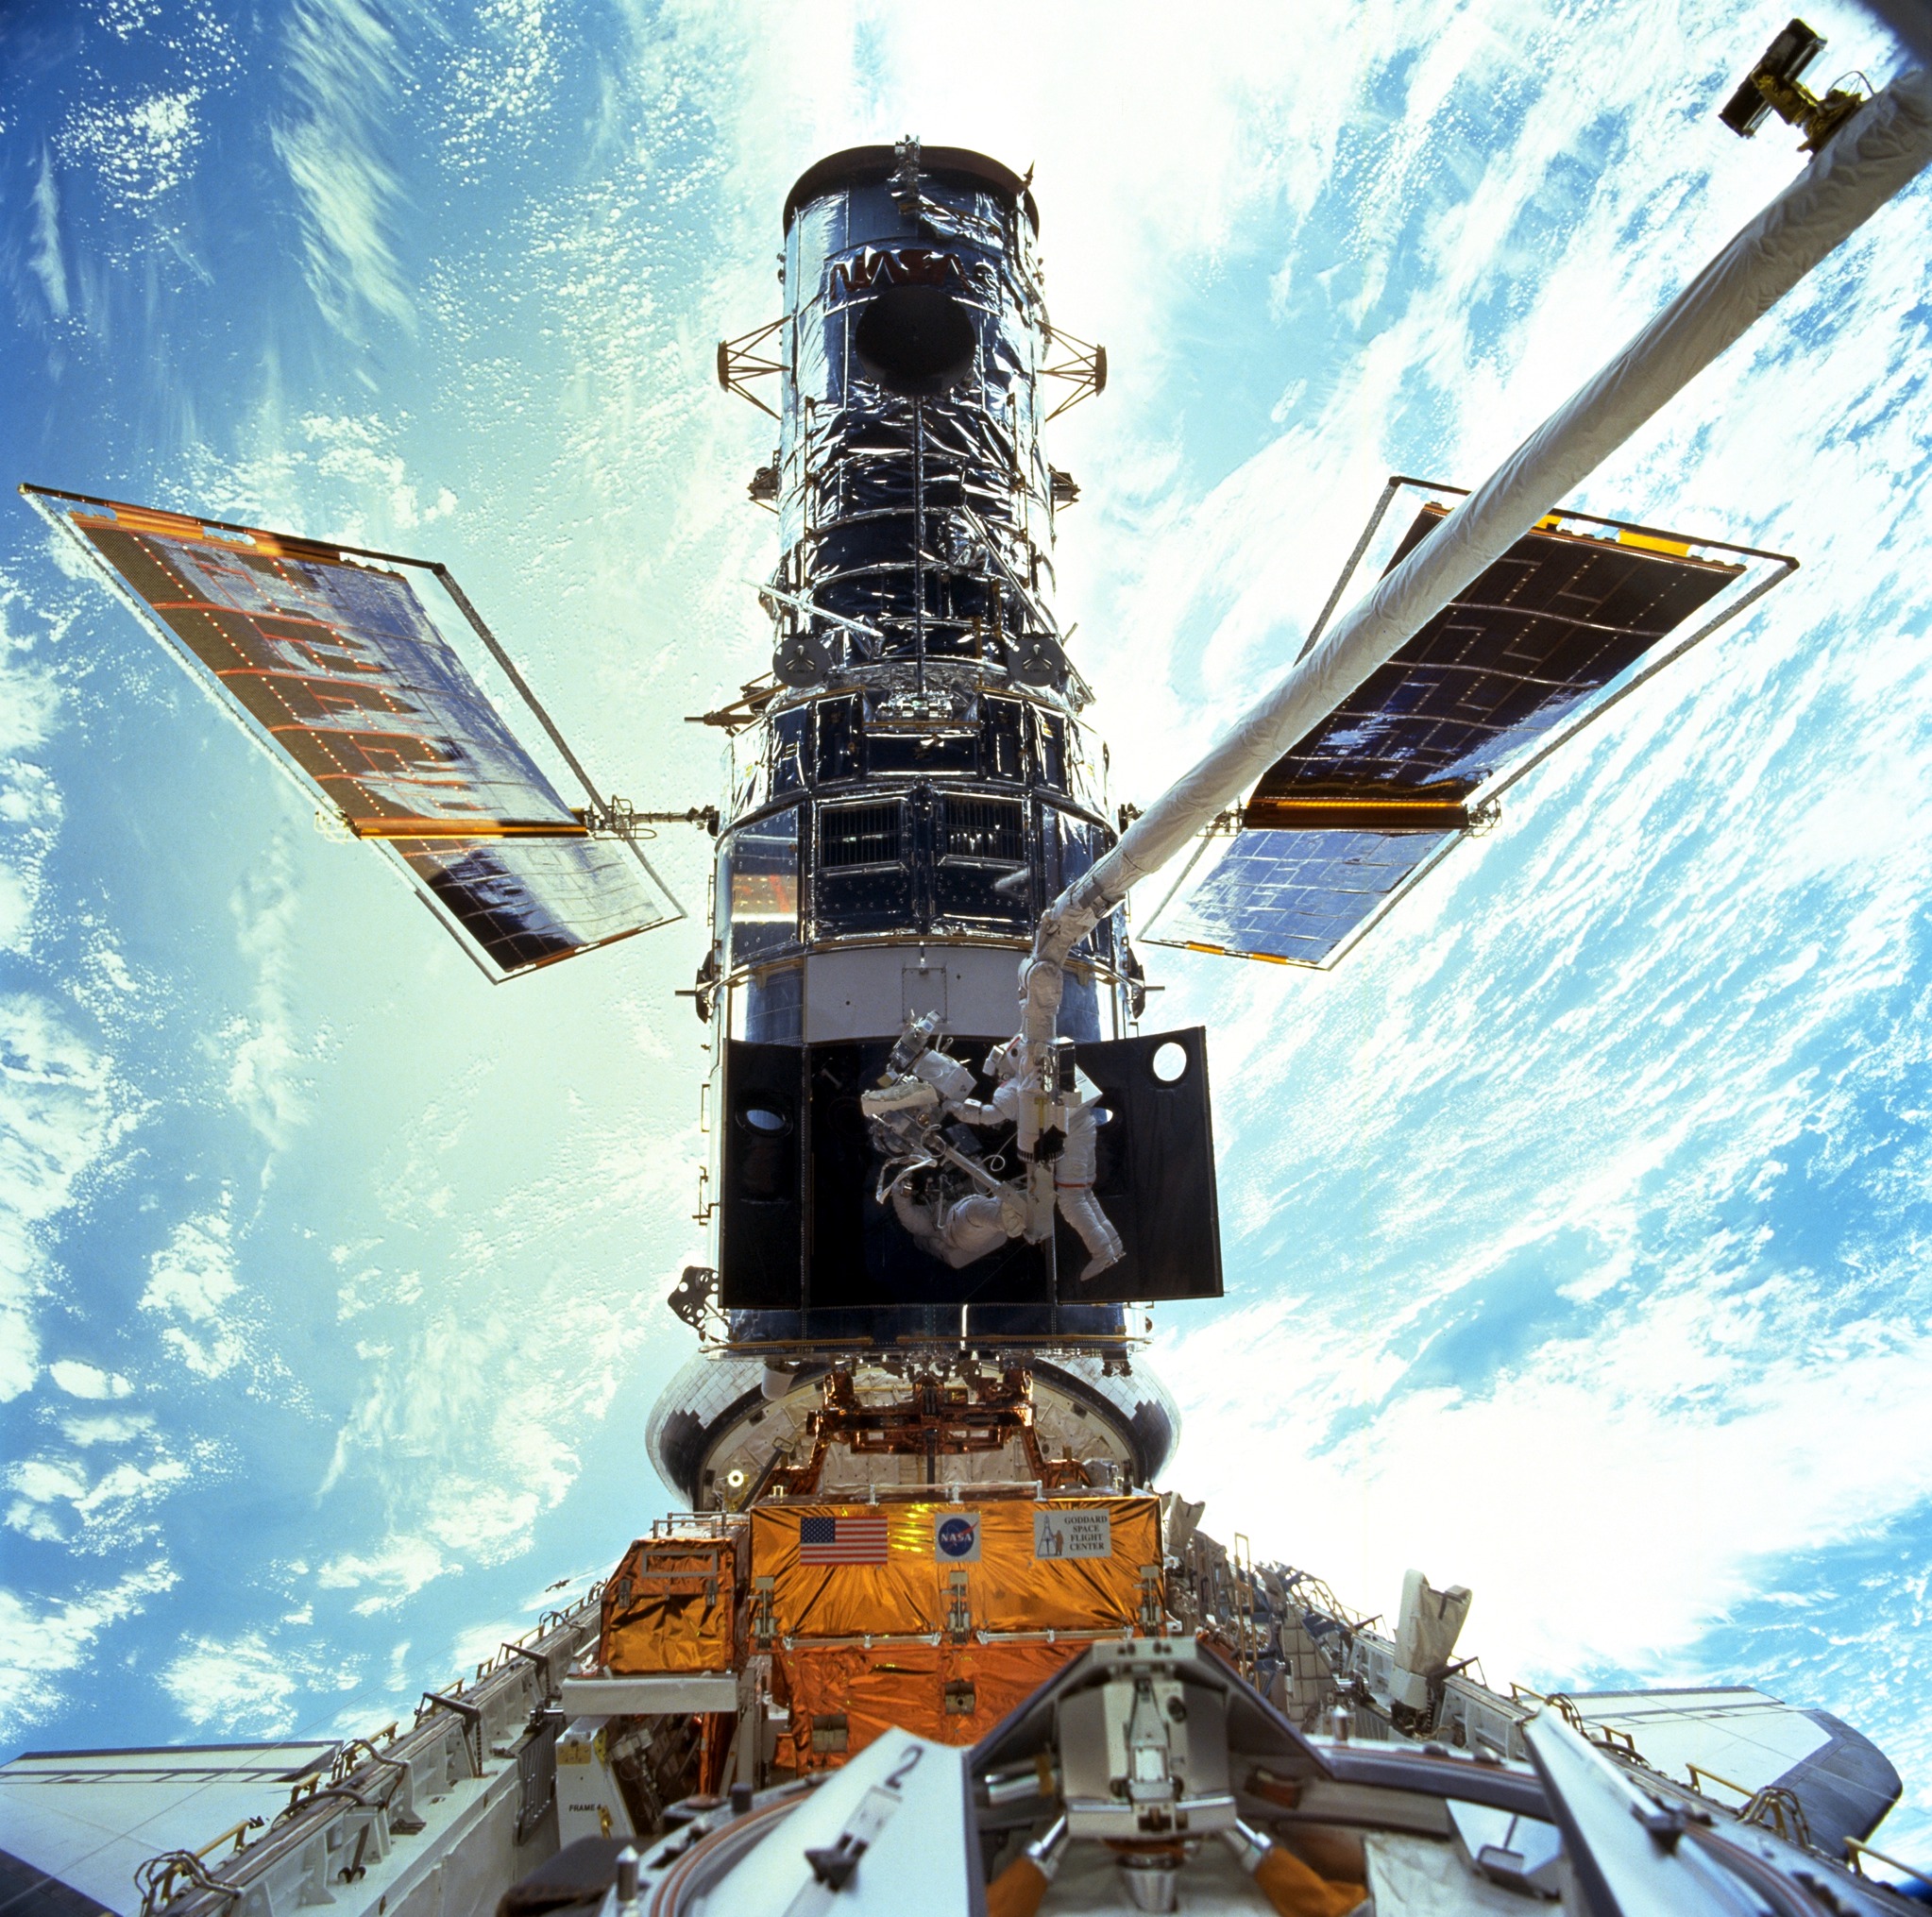 Astronauts Steven L. Smith and John M. Grunsfeld are photographed during the December 1999 Hubble servicing mission of STS-103.